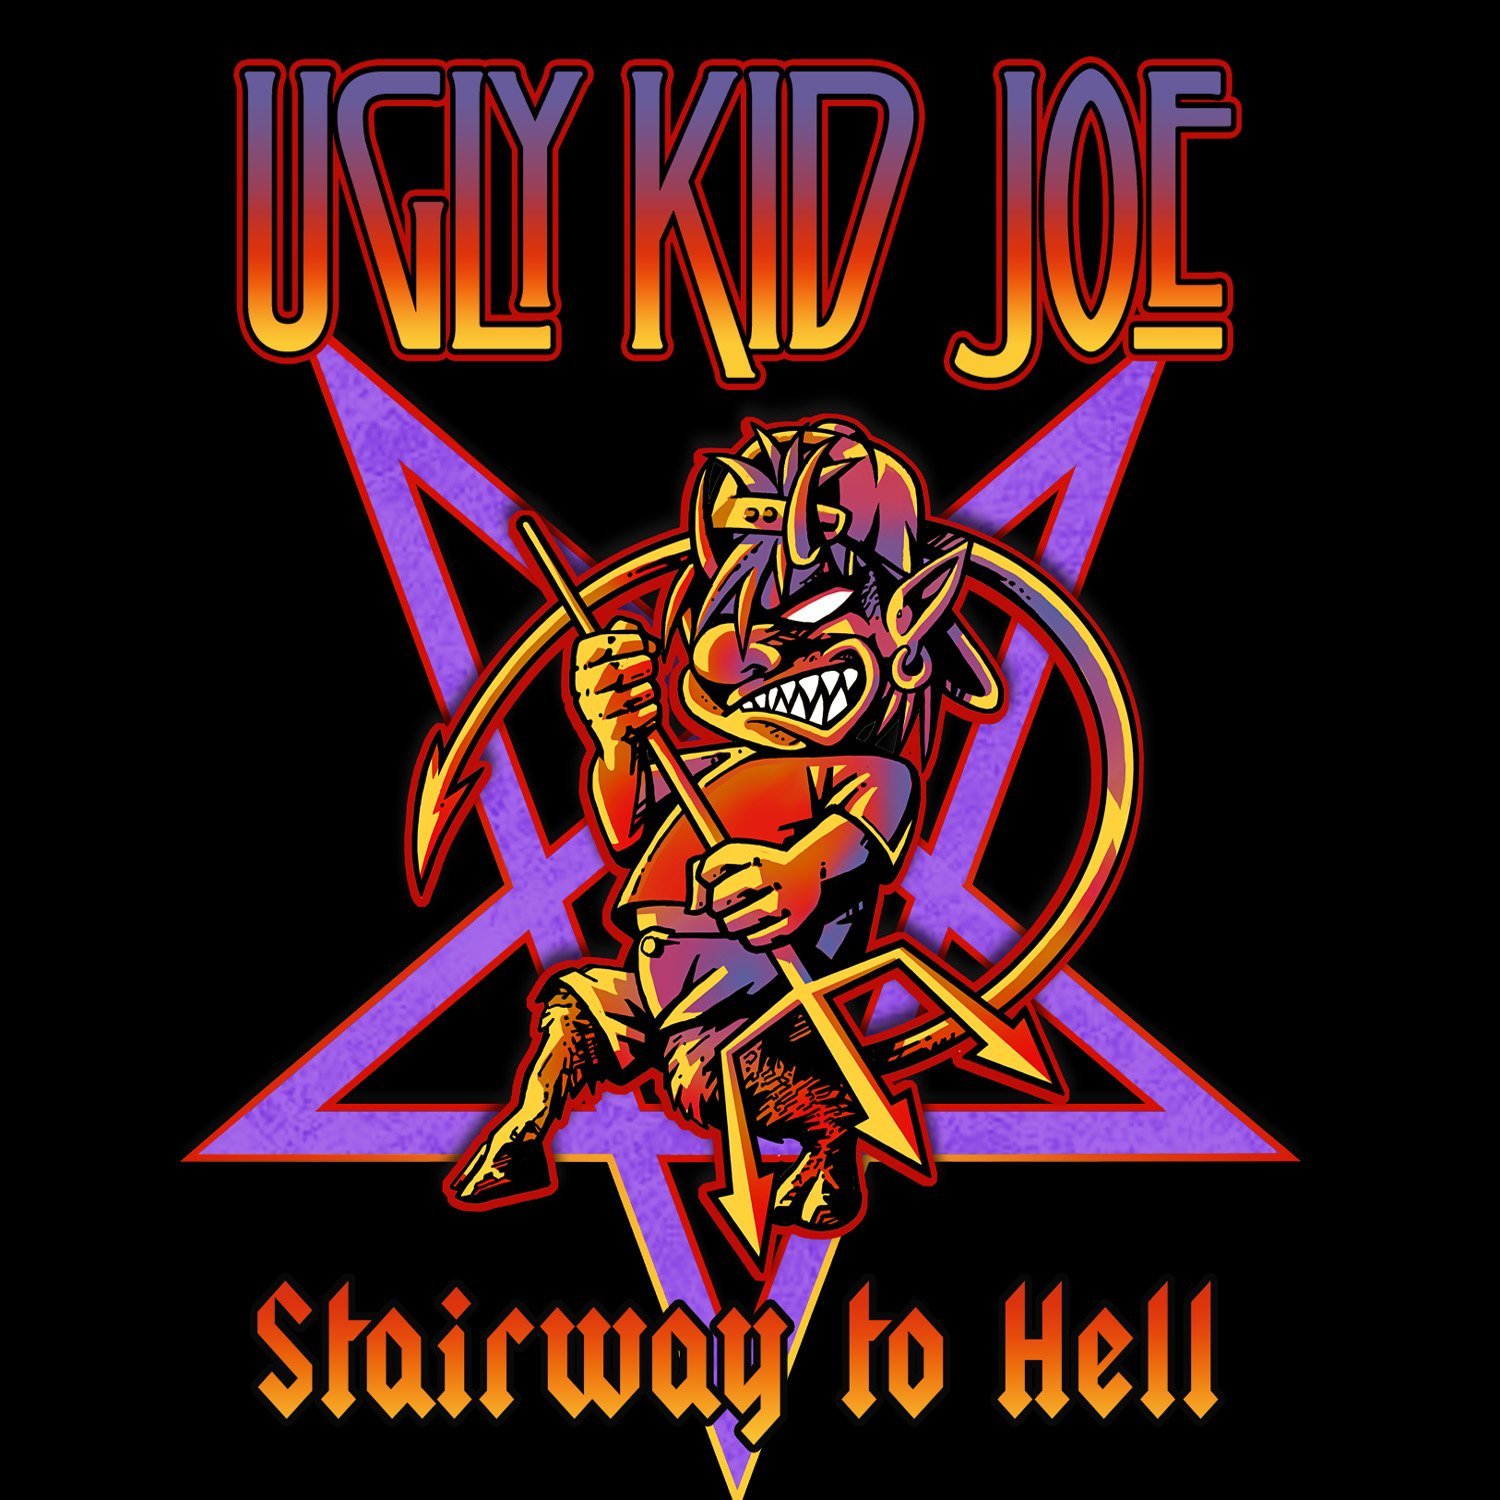 News Added Mar 22, 2013 Ugly Kid Joe - Stairway to Hell: This title will be released on April 16, 2013. Submitted By rajab Track list: Added Mar 22, 2013 1. Devil's Paradise 2. You Make Me Sick 3. No One Survives 4. I'm Alright 5. Love Ain't True 6. Another Beer 7. Cat's In […]